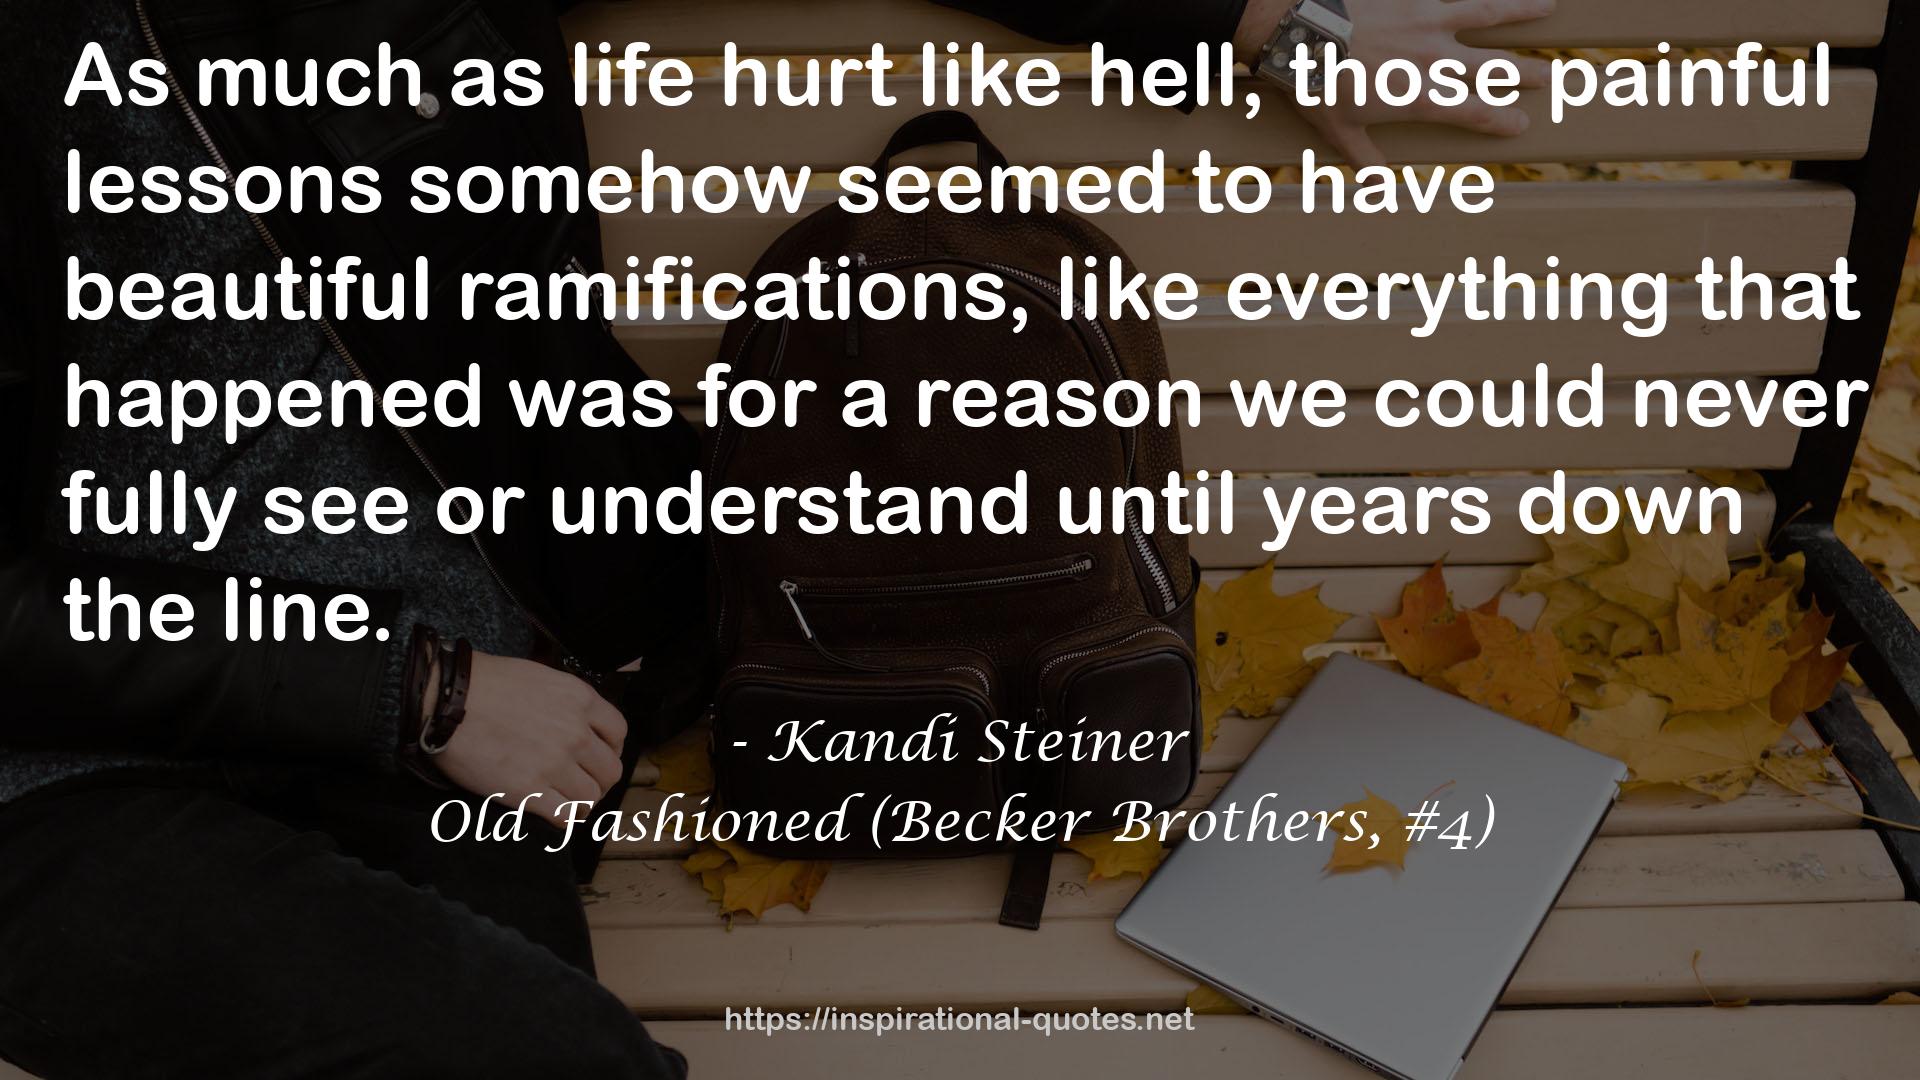 Old Fashioned (Becker Brothers, #4) QUOTES